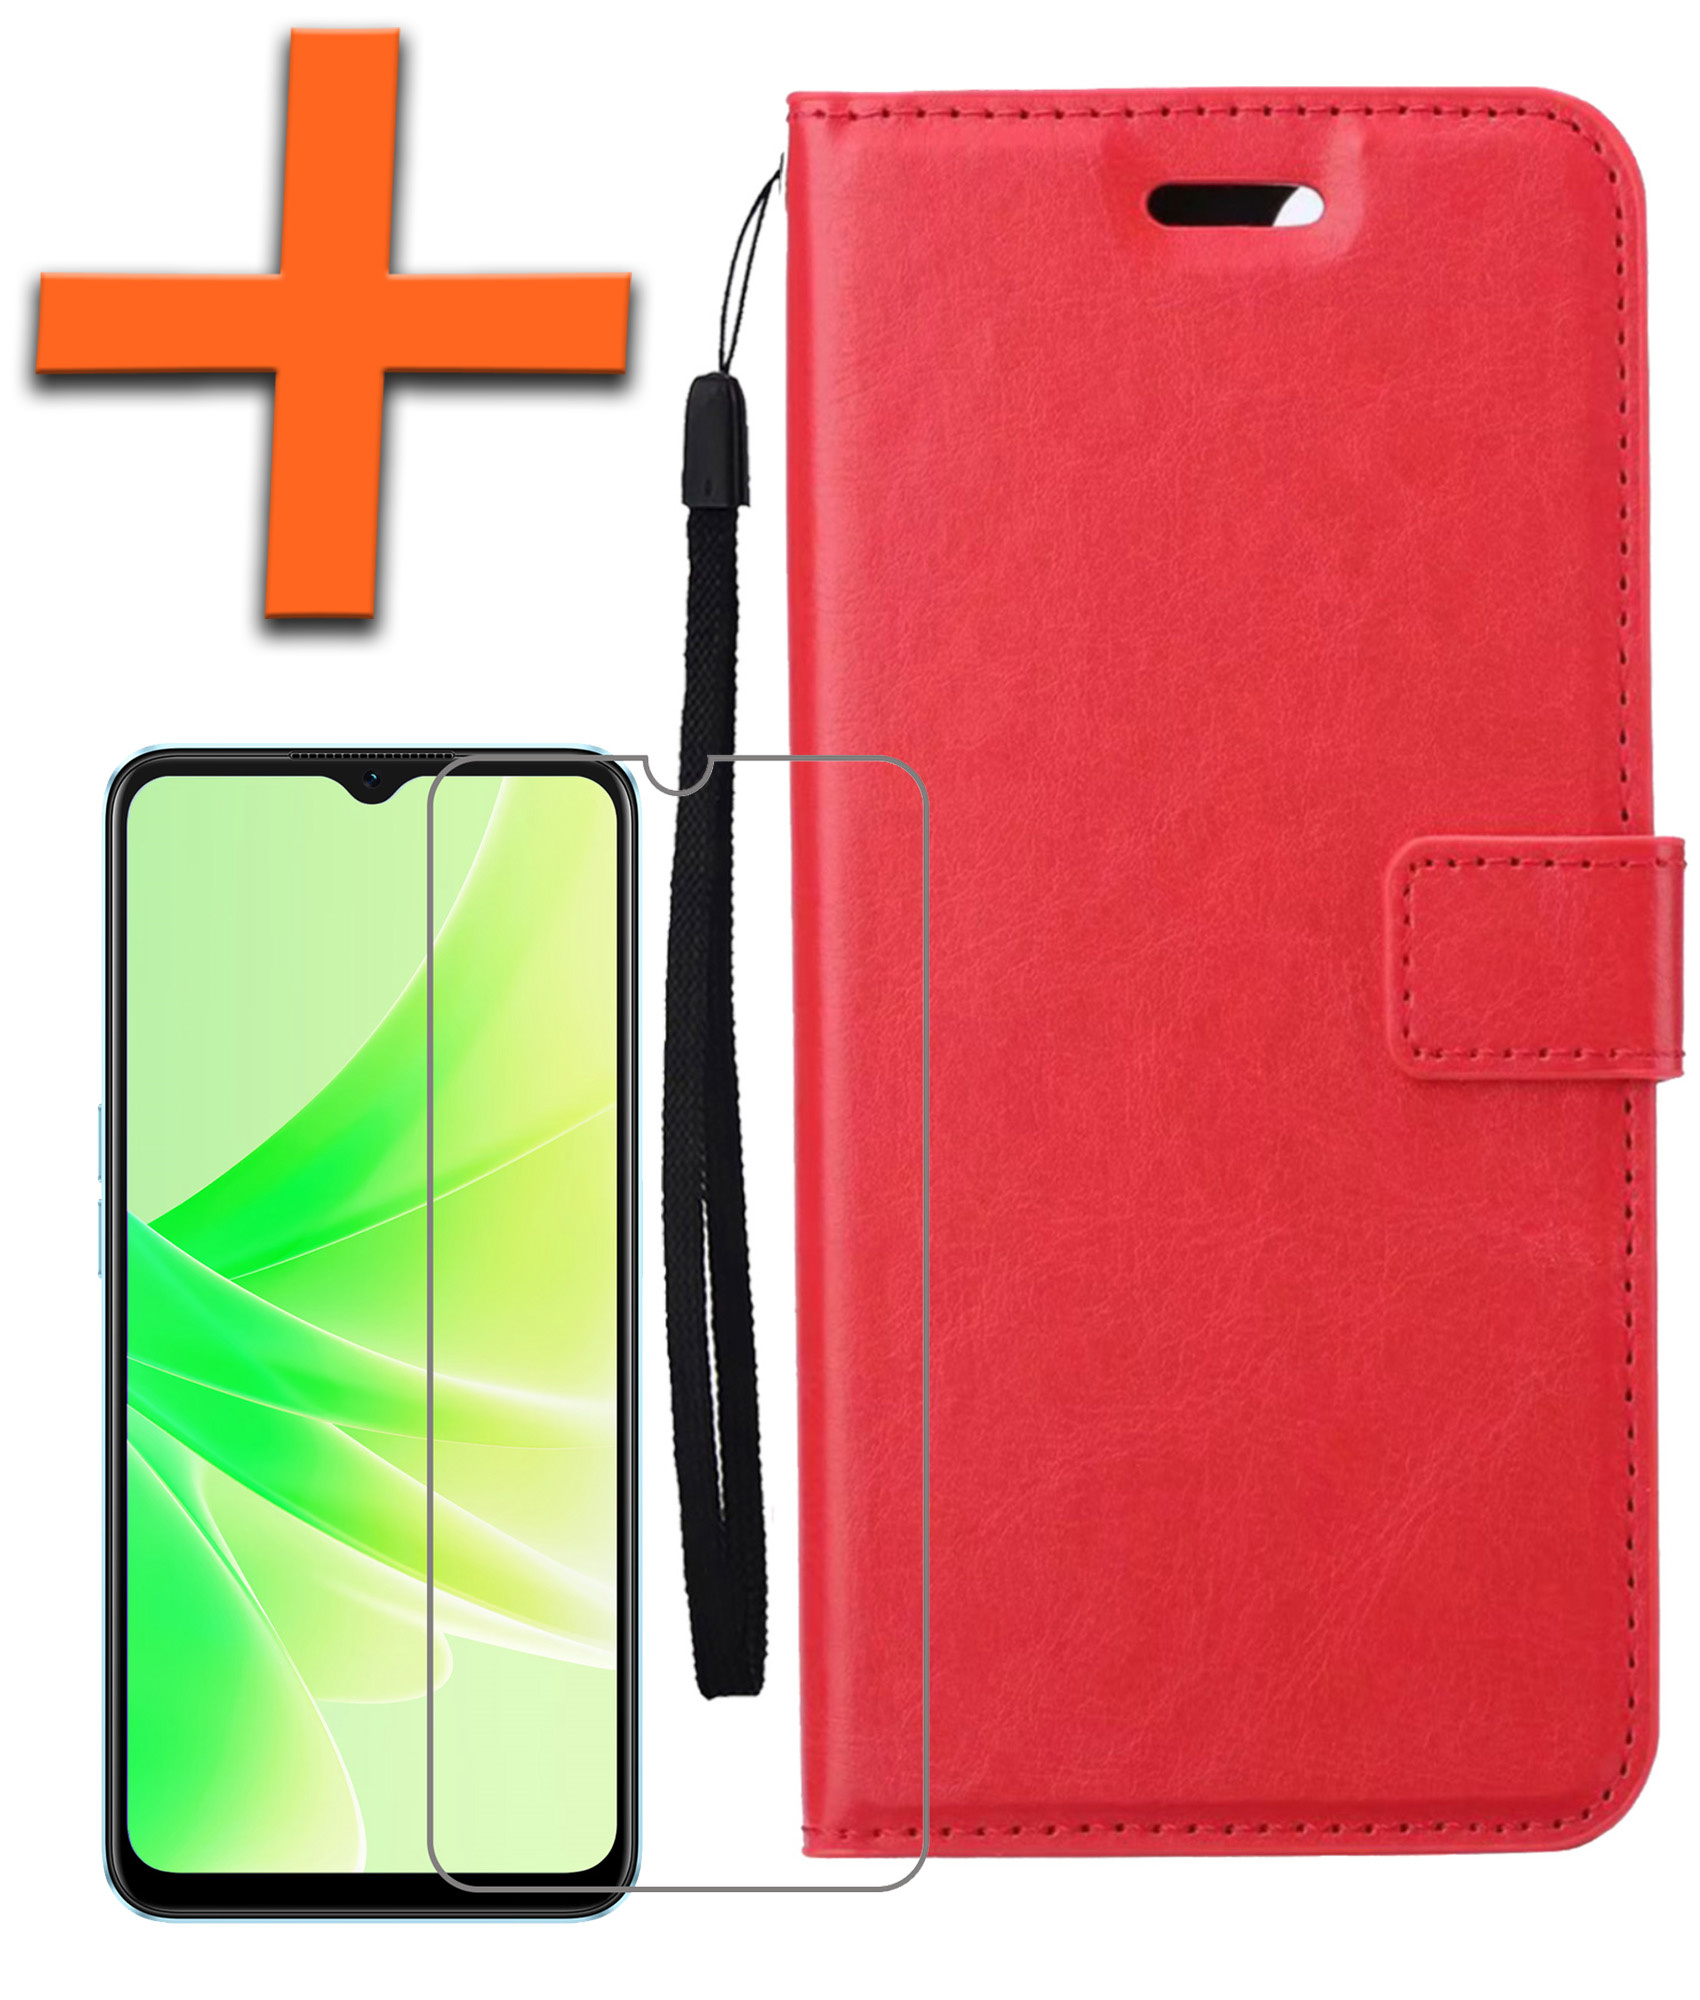 Nomfy OPPO A57s Hoes Bookcase Flipcase Book Cover Met Screenprotector - OPPO A57s Hoesje Book Case - Rood